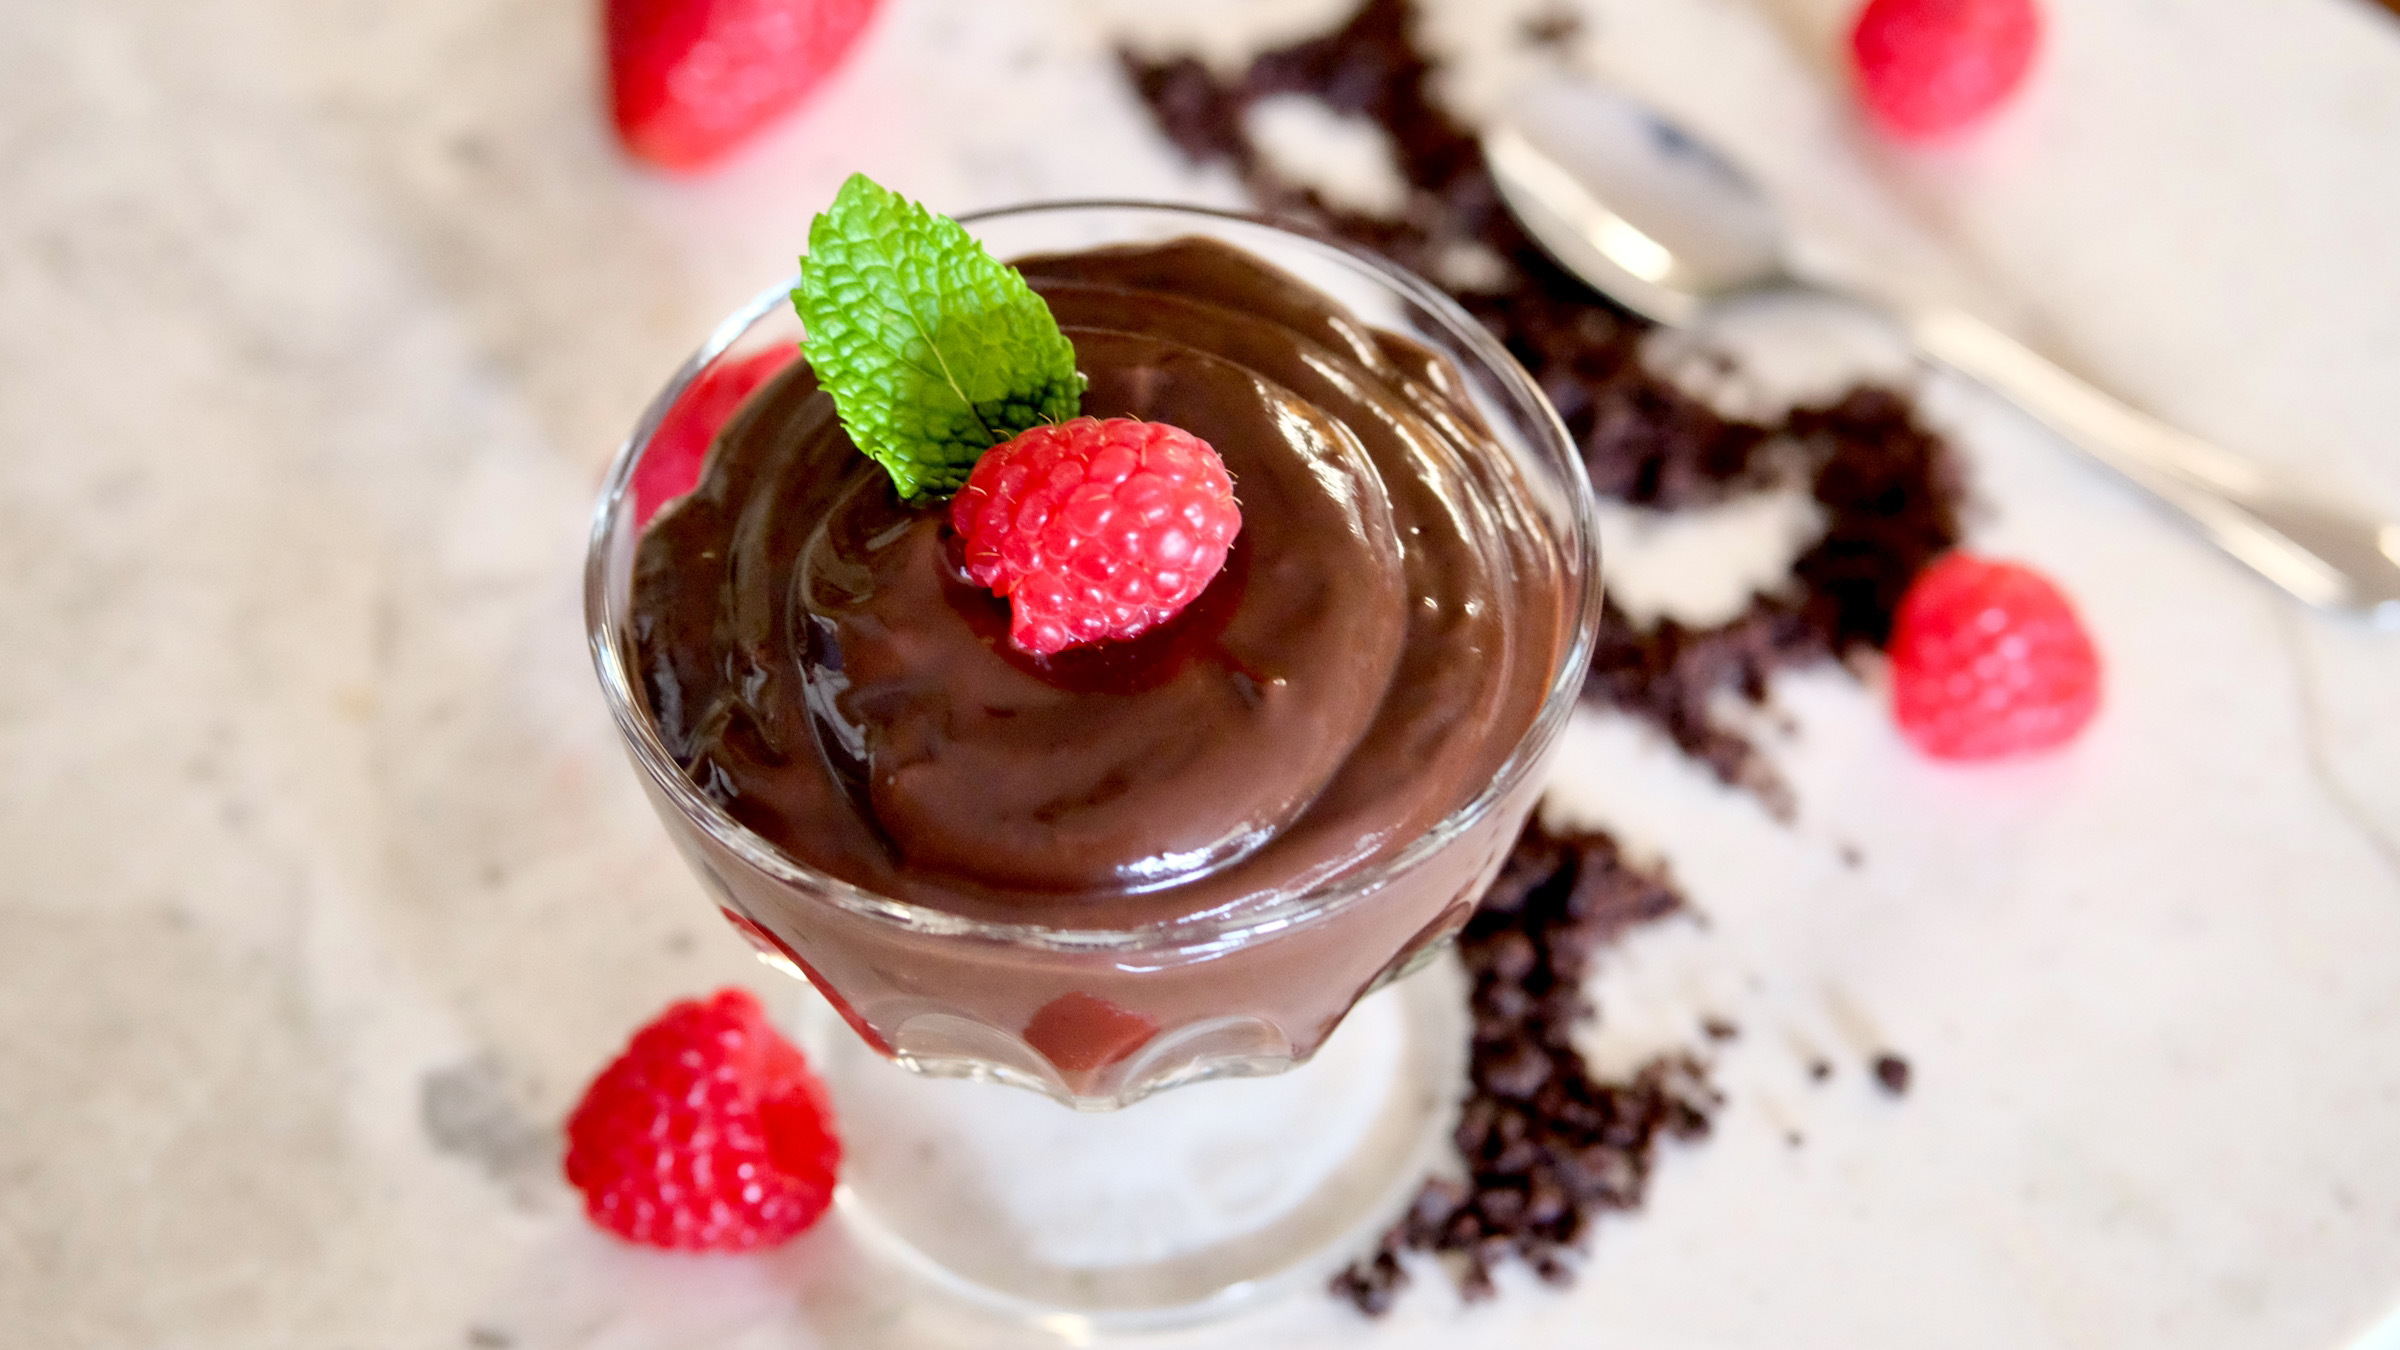 Chocolate Pudding in dessert glass garnished with raspberry and mint leave is sitting on a beige and white marble top. Spoon is in bakground of upper right with chocolate sand scattered about the base of dessert glass with fresh strawberries and raspberries.